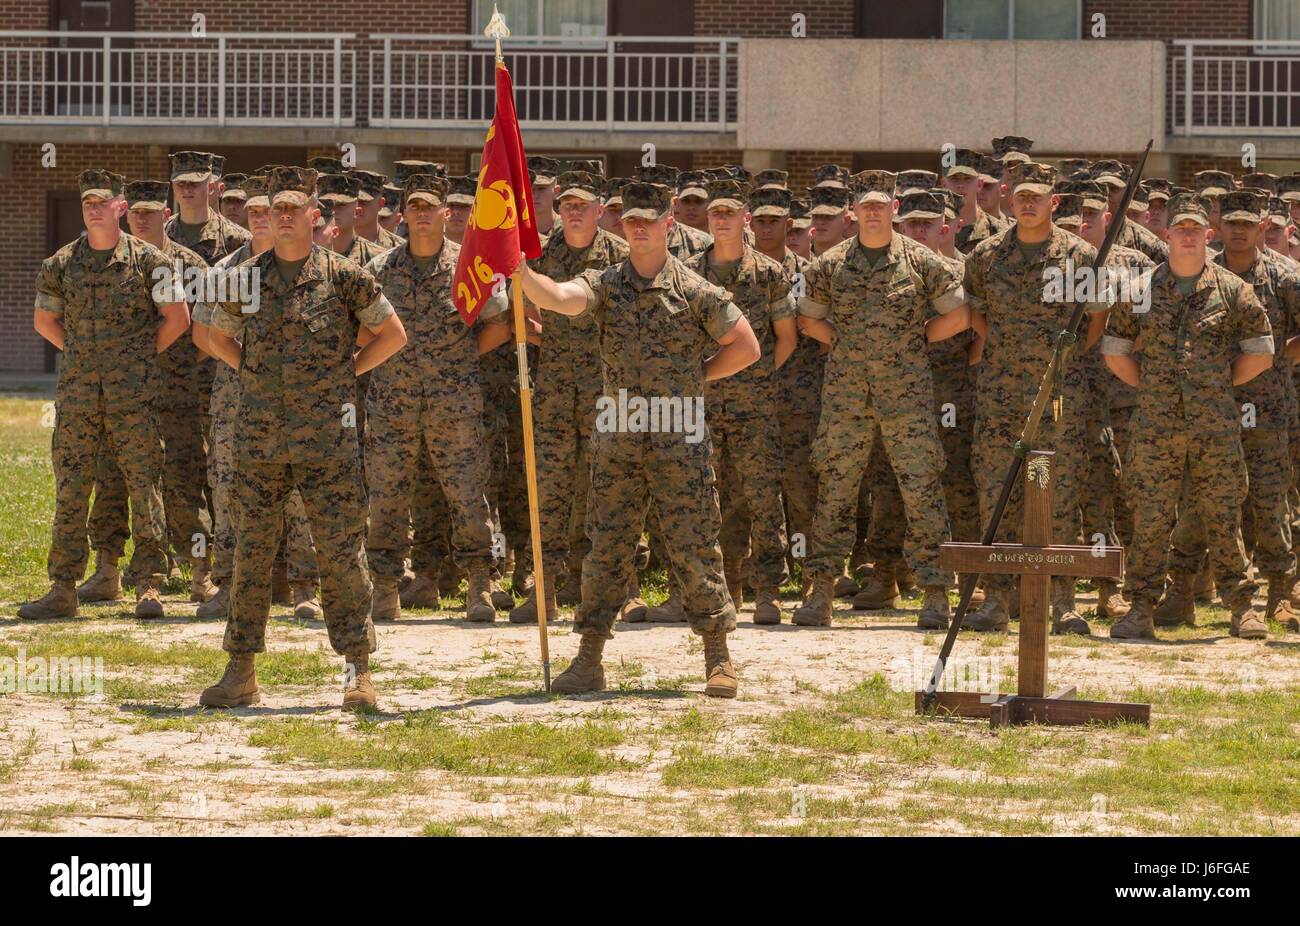 Marines stand in a formation during a Chesty Puller award ceremony at Camp Lejeune, N.C., May 15, 2017. The Marines earned the award due to their impressive conduct in combat, garrison and in the field of innovation throughout the calendar year of 2016. The Marines are with 2nd Battalion, 6th Marine Regiment, 2nd Marine Division. (U.S. Marine Corps photo by Pfc. Abrey D. Liggins) Stock Photo